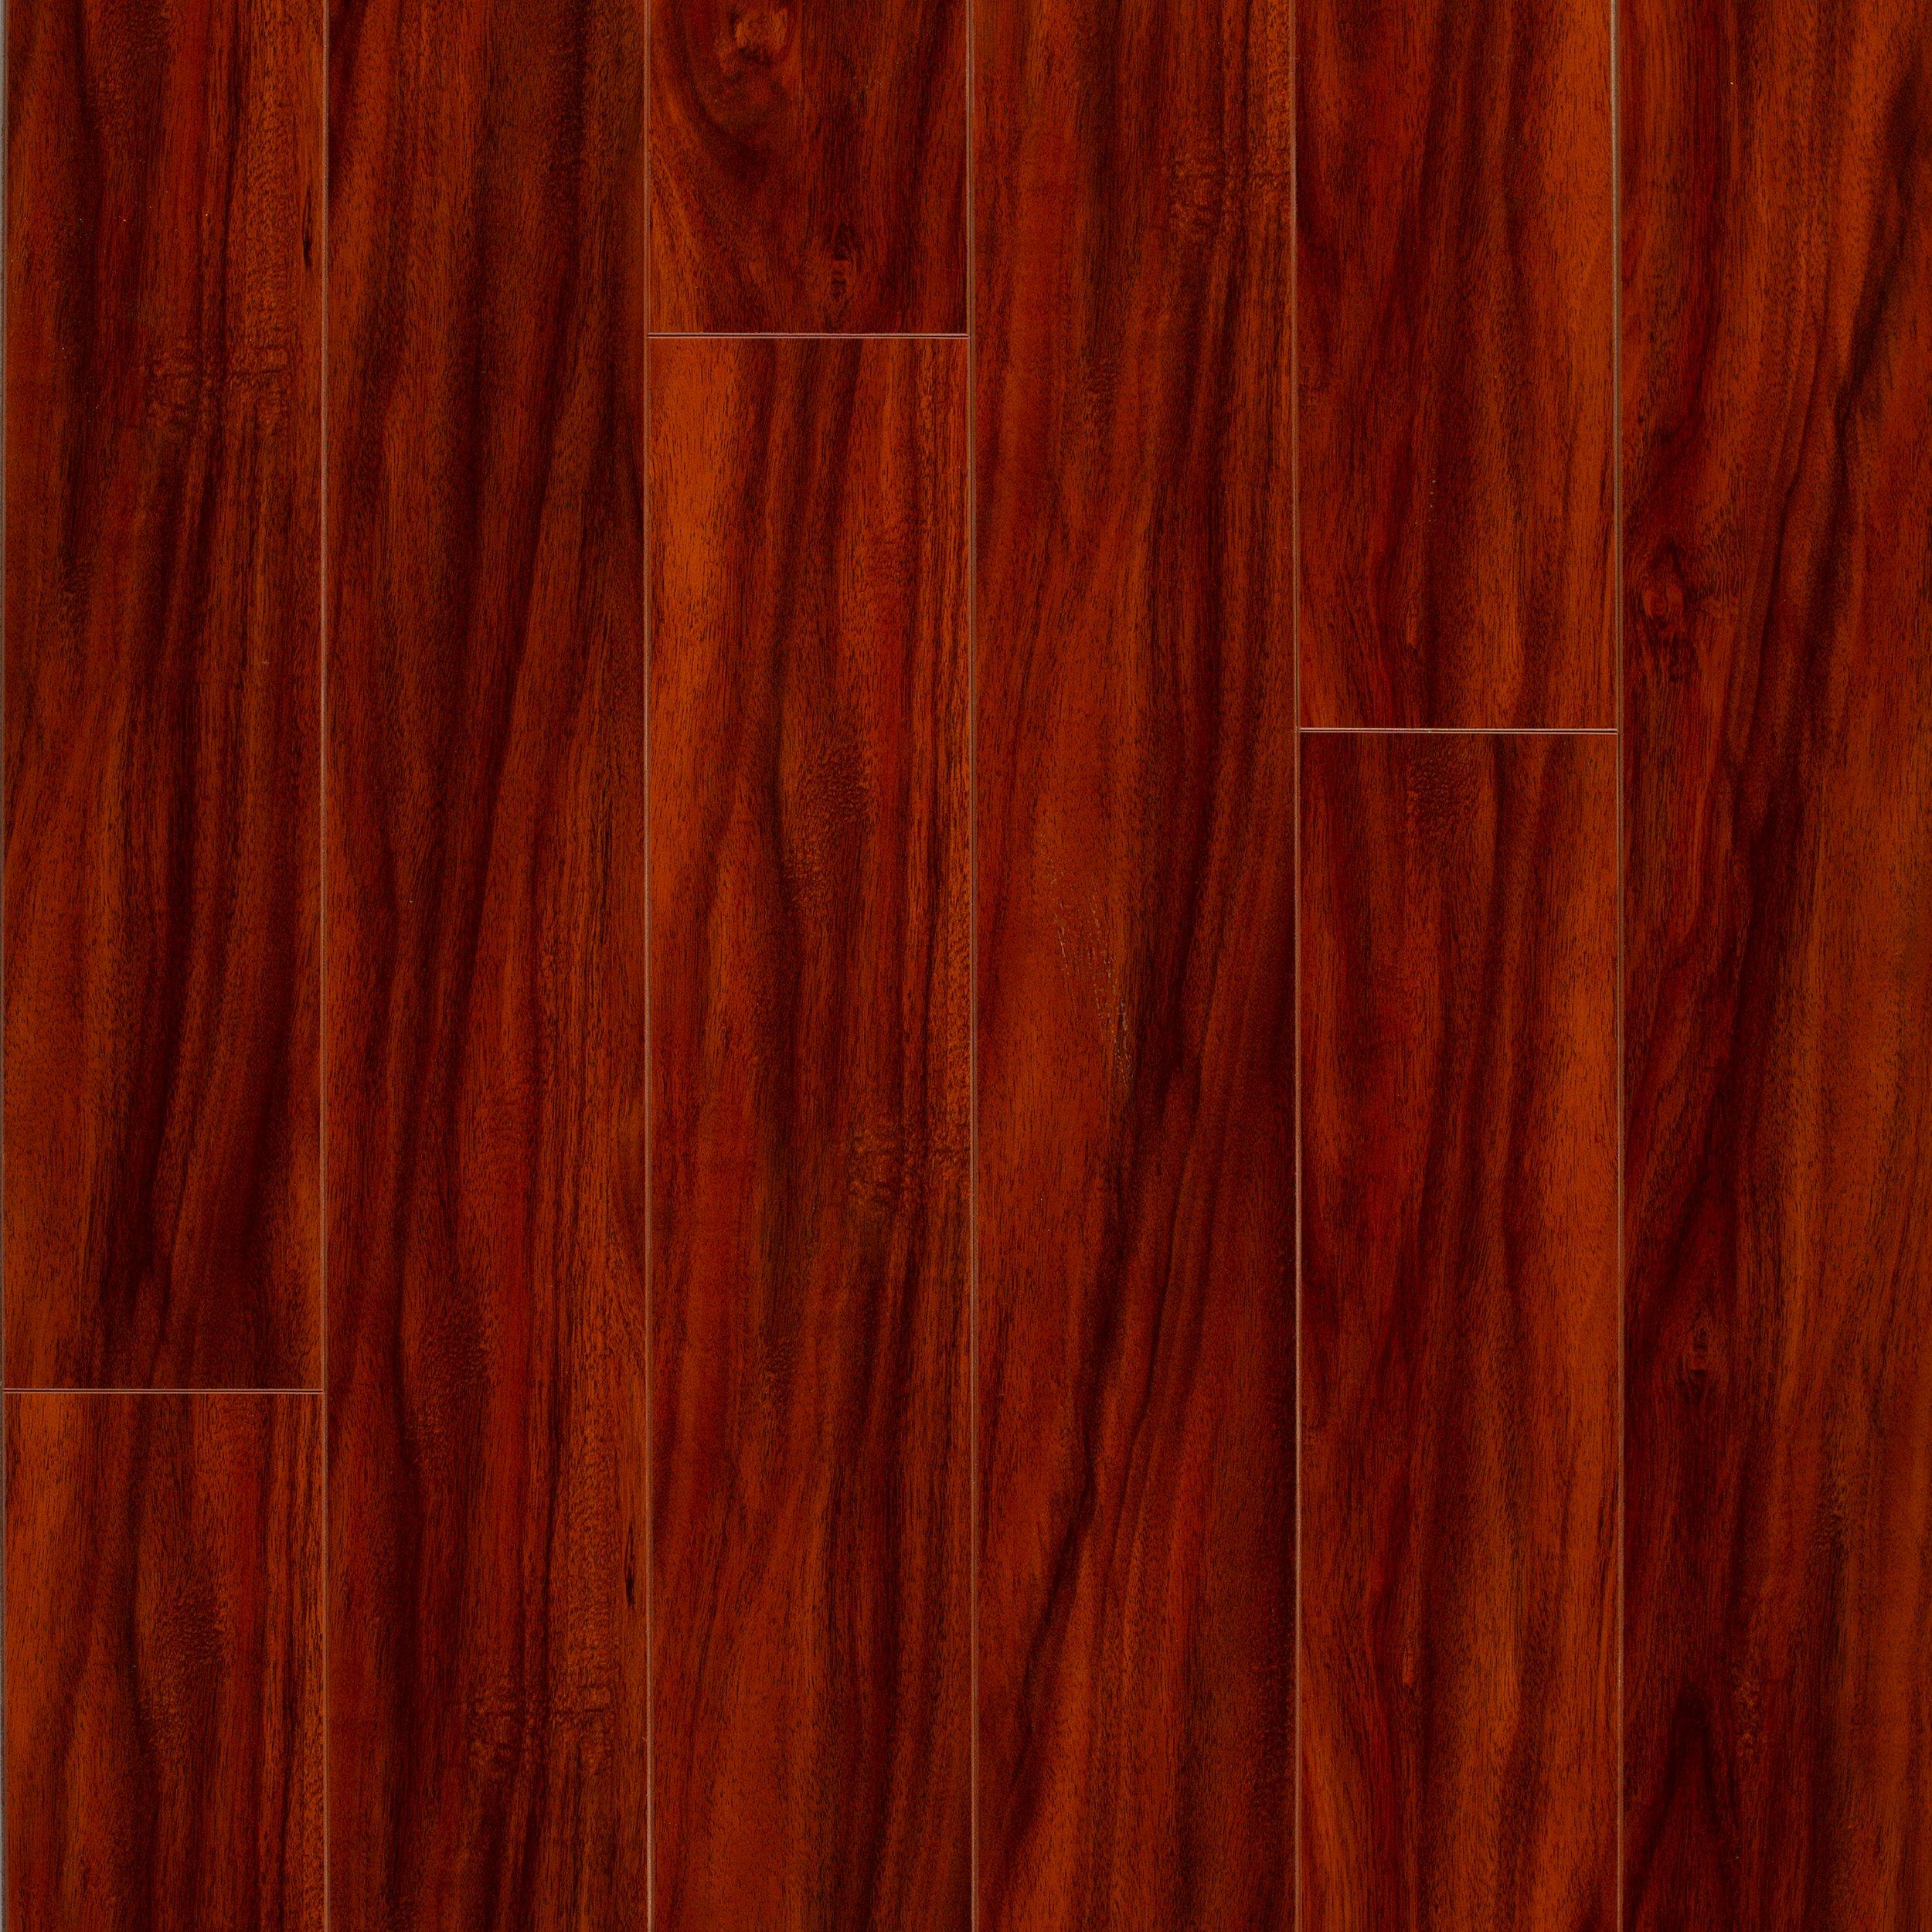 Woodmont Cherry High Gloss Water-Resistant Laminate